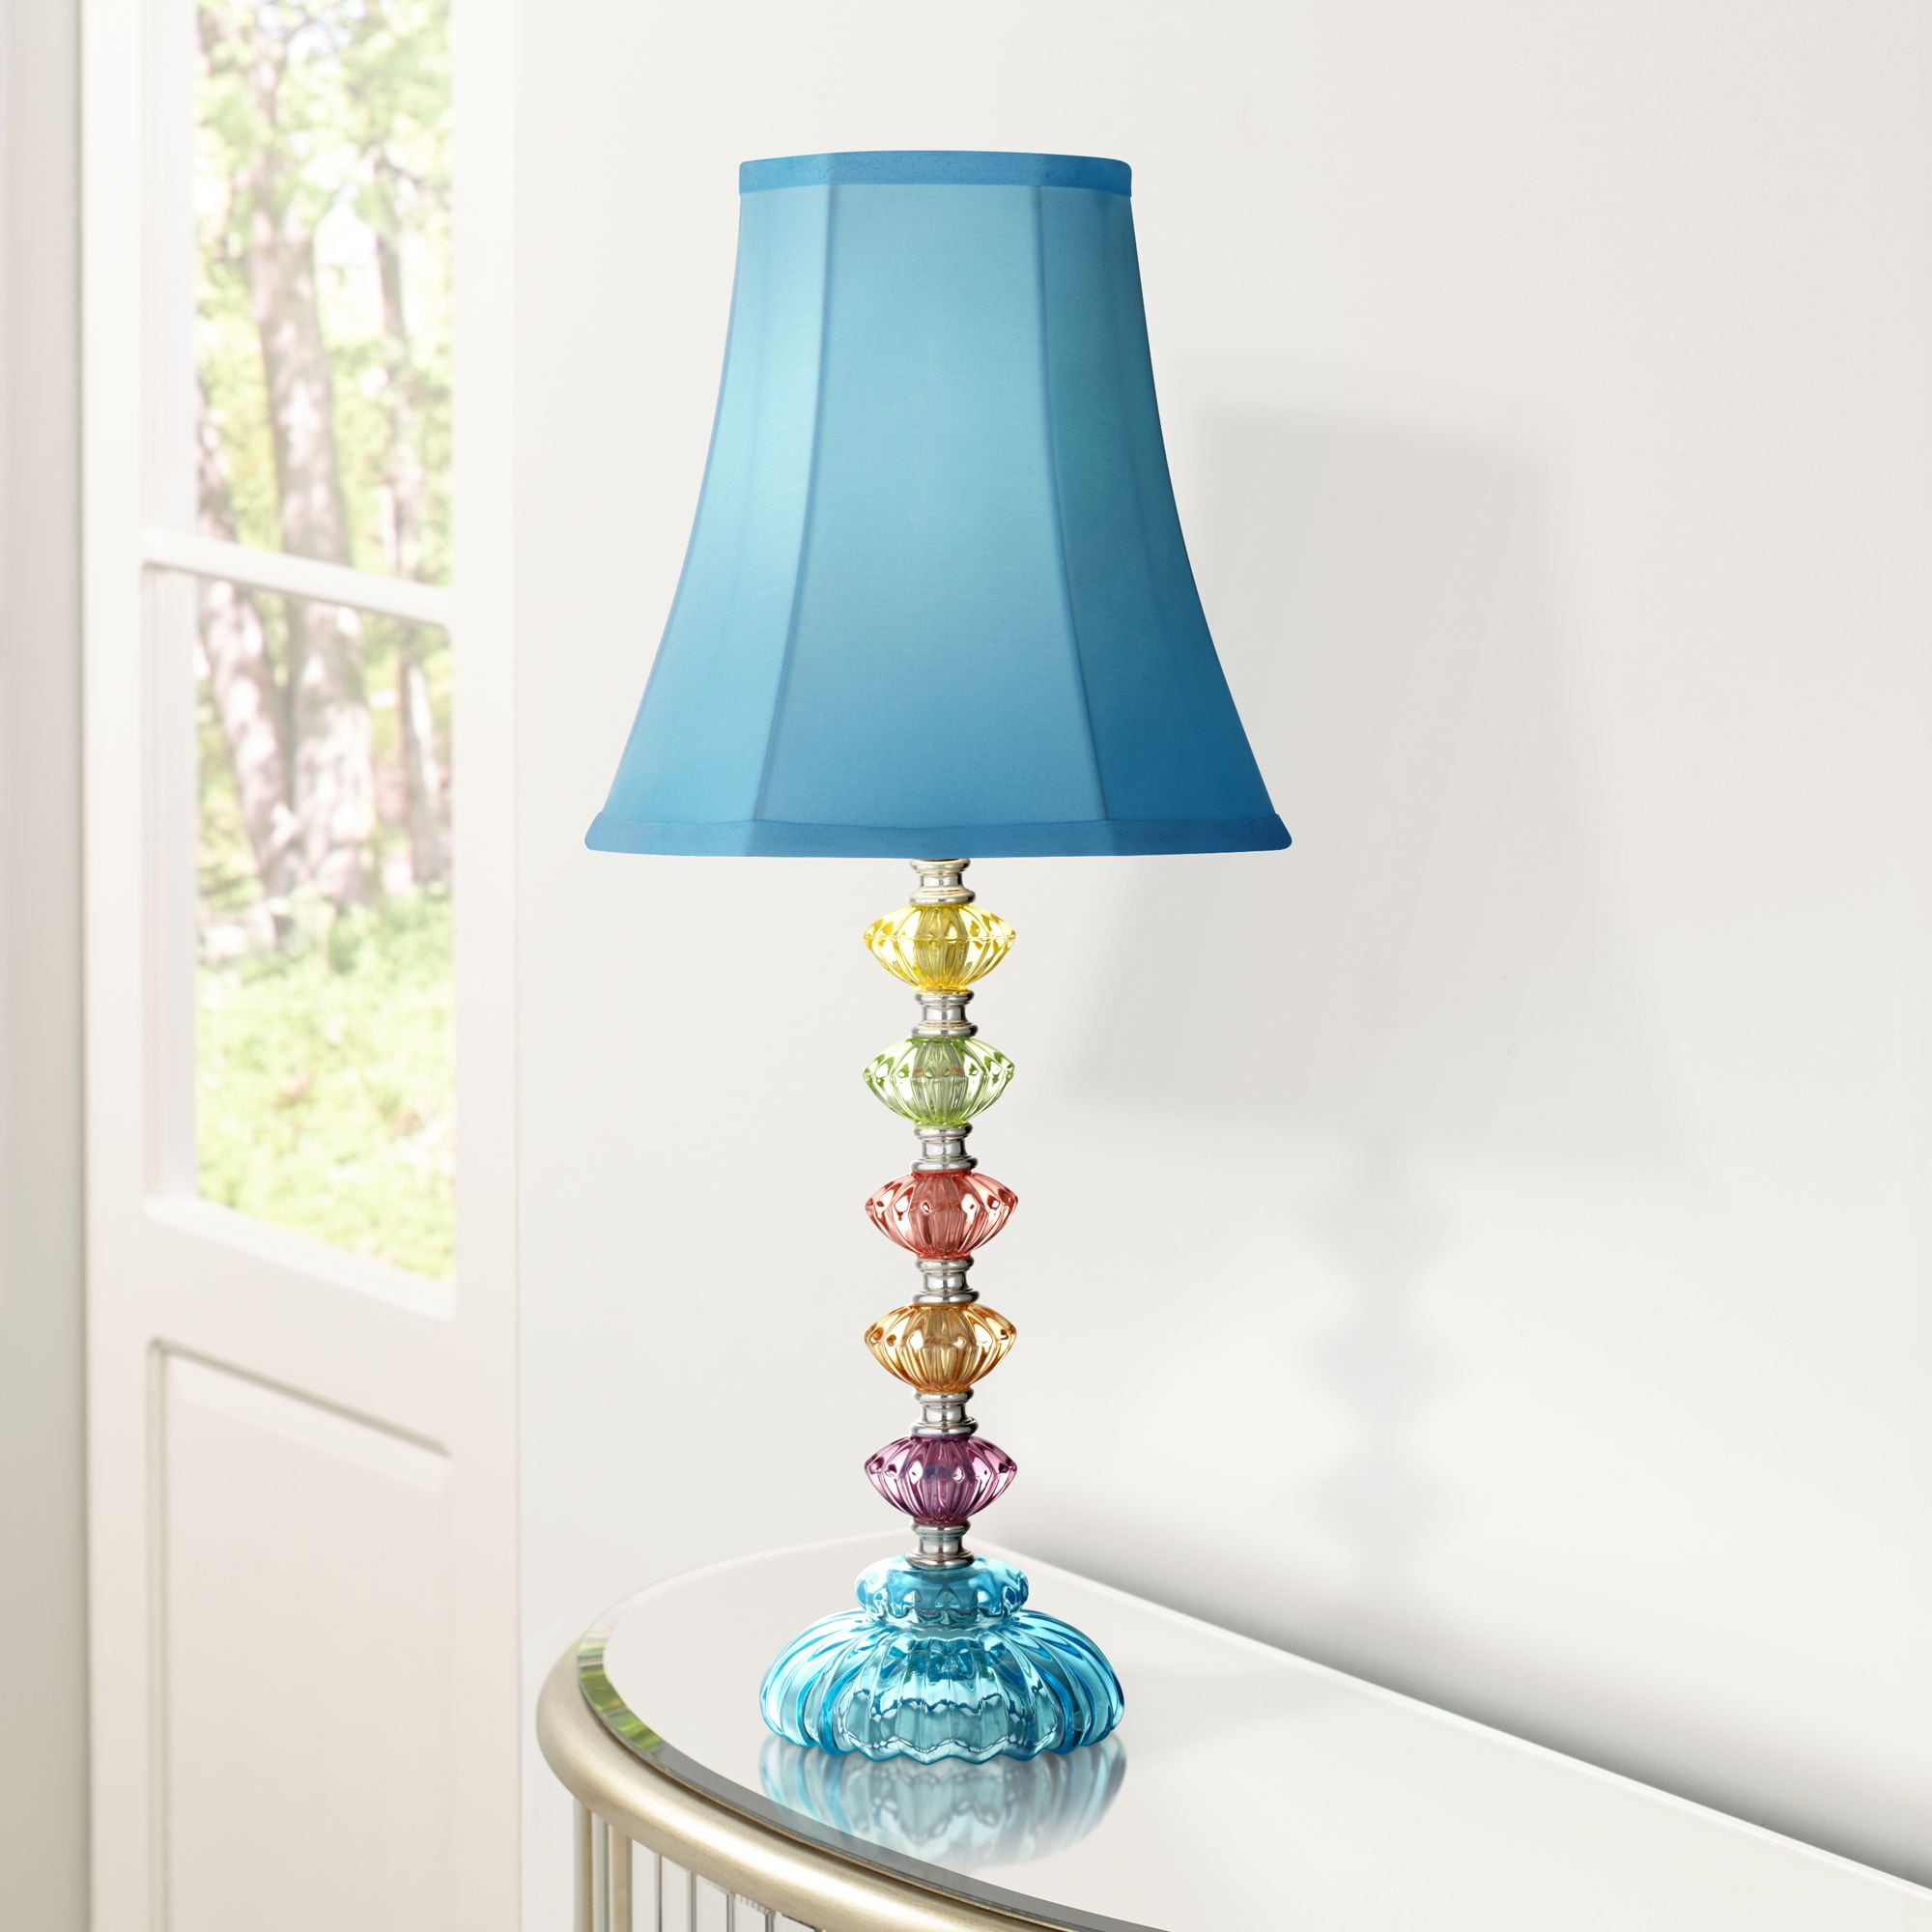 360 Lighting Bohemian Accent Table Lamp, Blue Table Lamps Bedroom